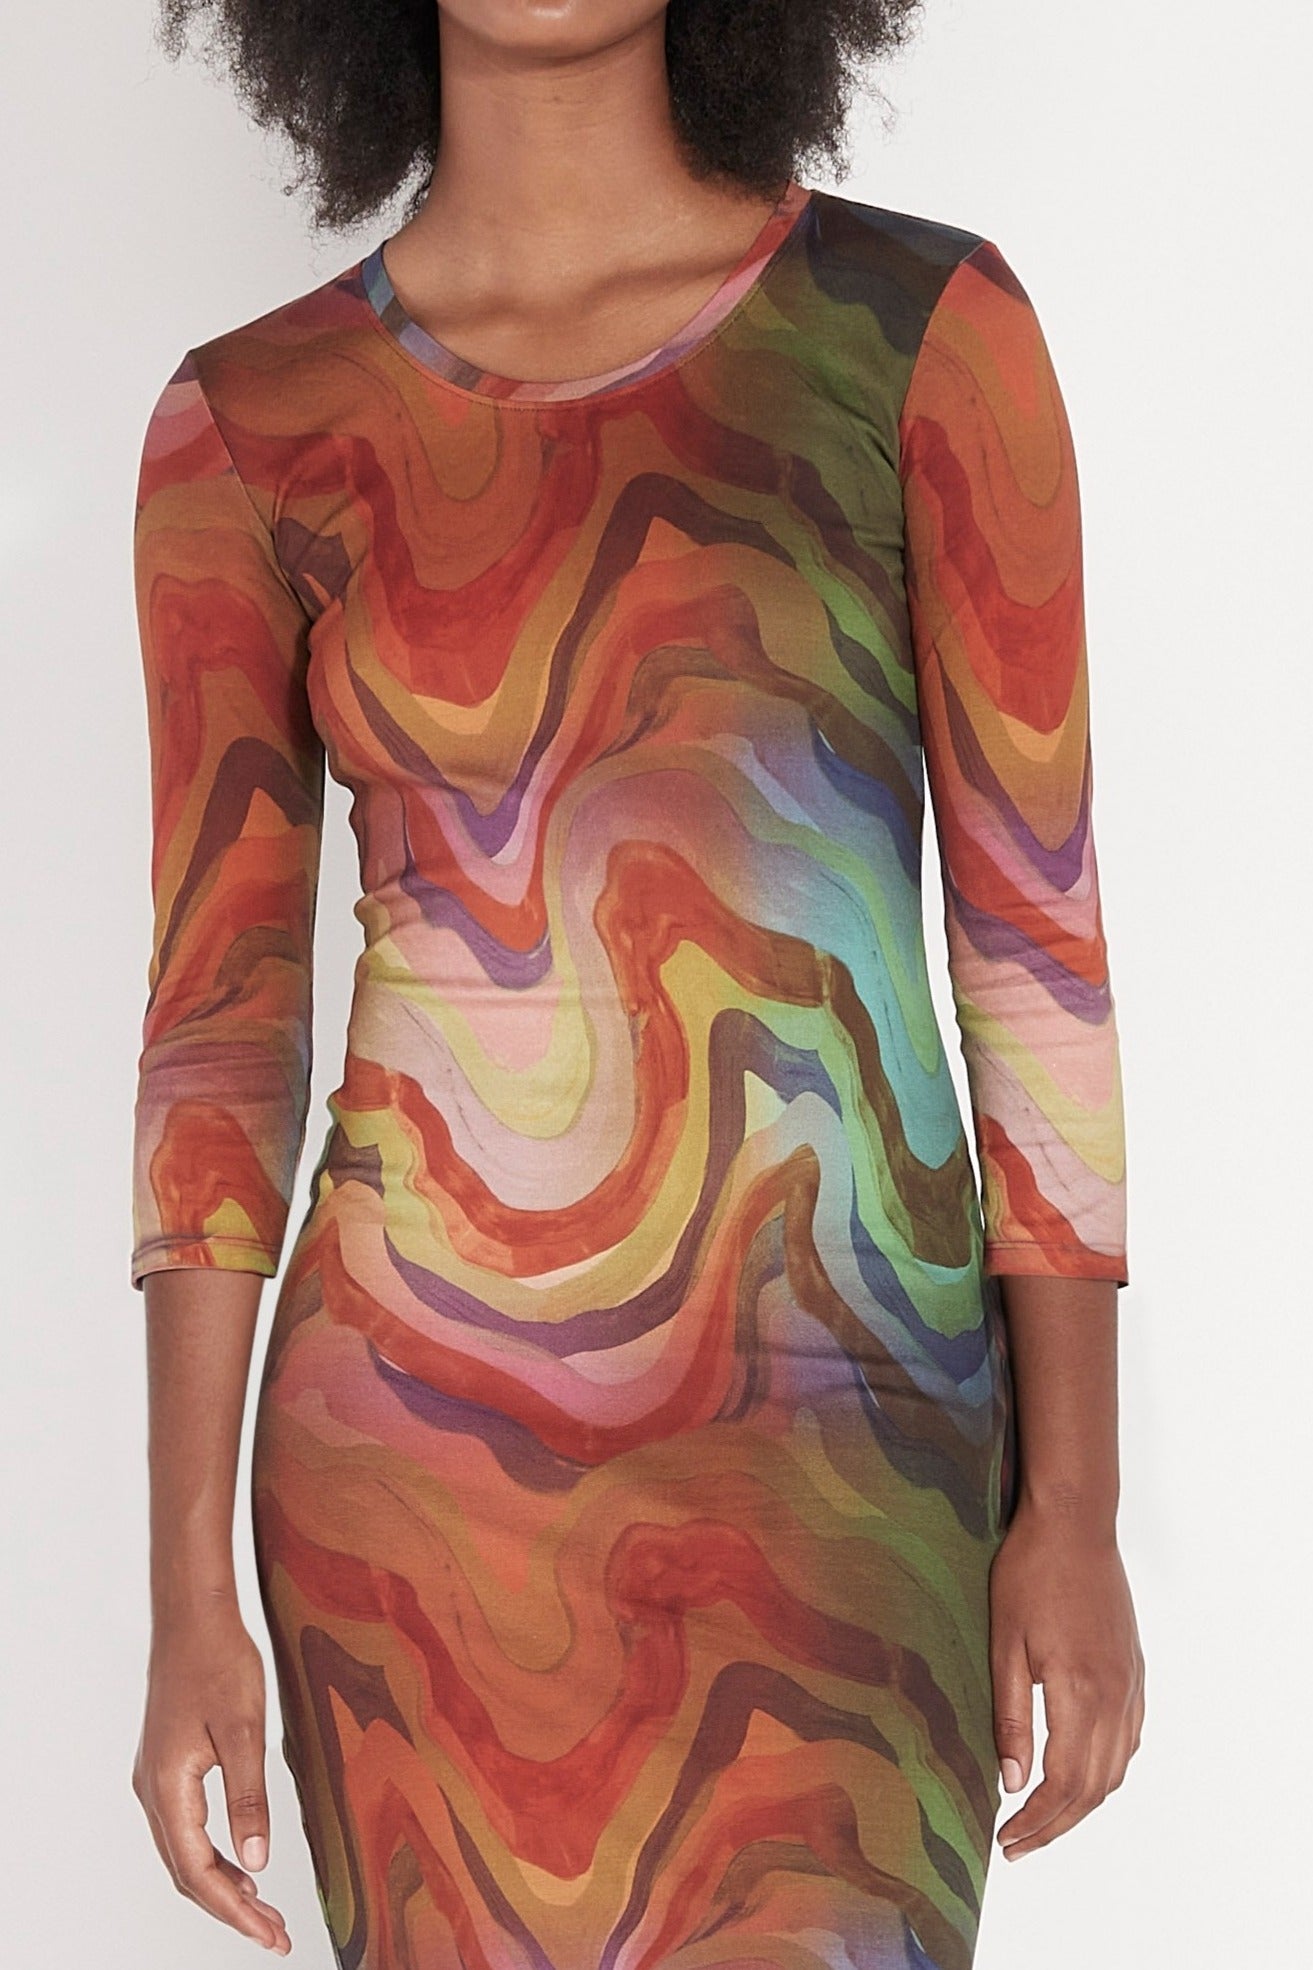 Multi Waves Printed Jersey Dress Front Close-Up View